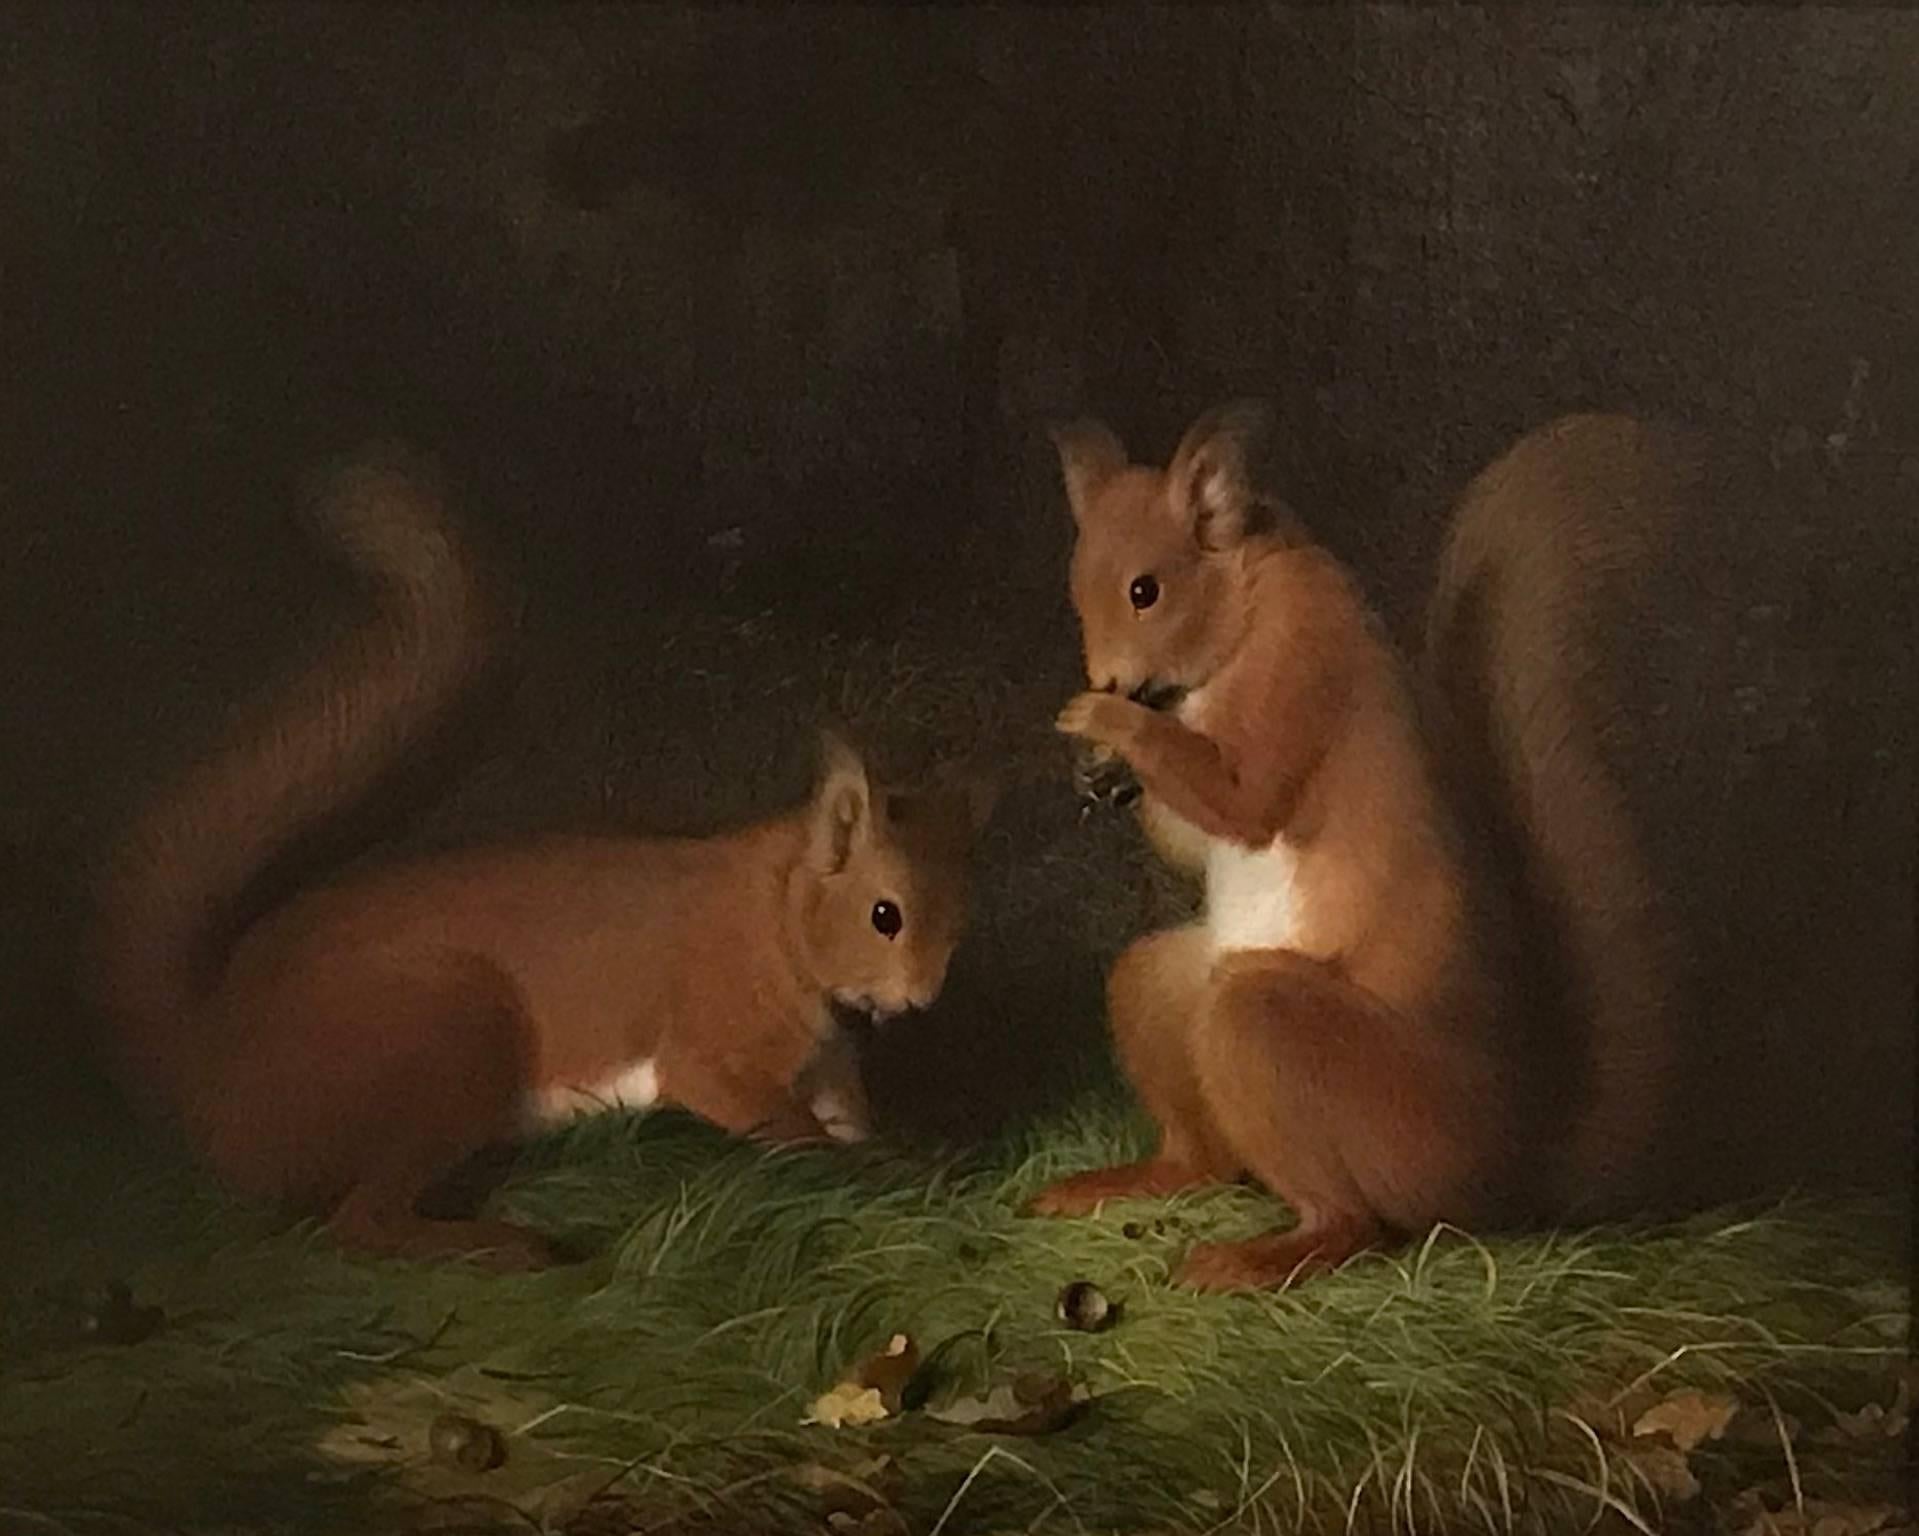 Abel Hold (1815-1896) Squirrels
Oil on Canvas, signed &Inscribed
Size 80cm x 70cm framed.

Abel Hold was born in Alverthorpe, Wakefield, one of 9 children of a Quaker family.
In his early years Abel was a house painter and later achieved fame as an